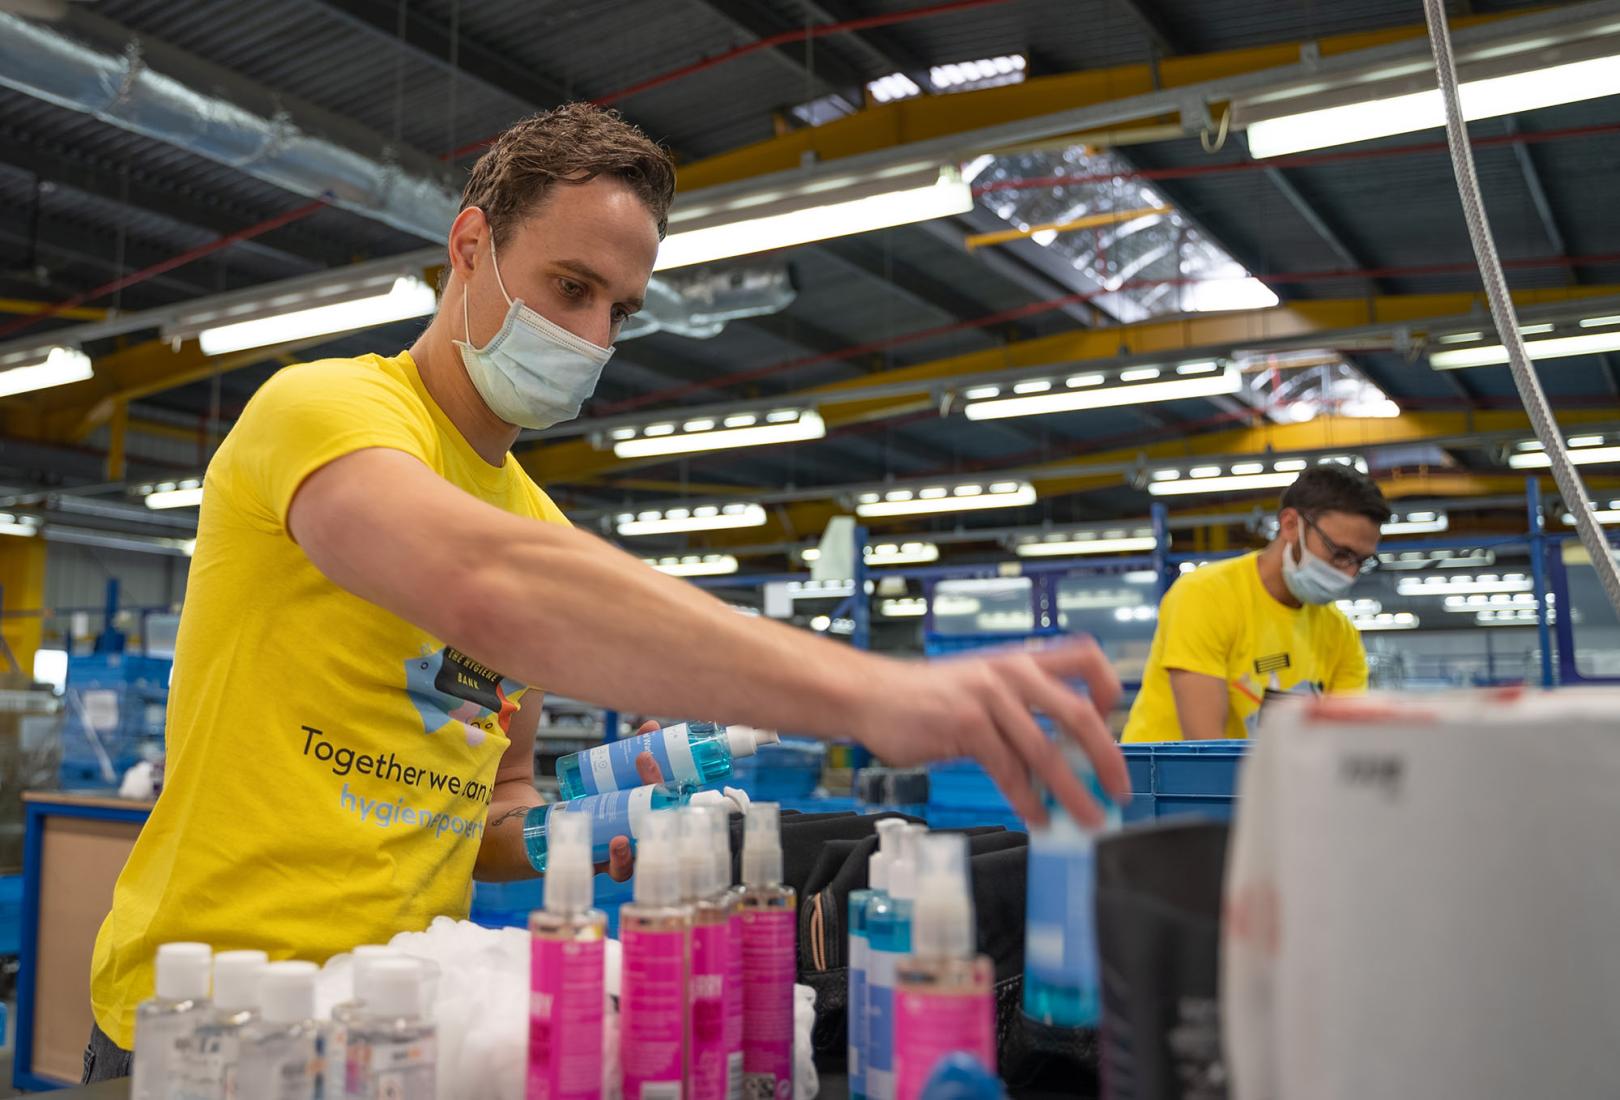 Team members packing product donations for charity partner The Hygiene Bank in the UK